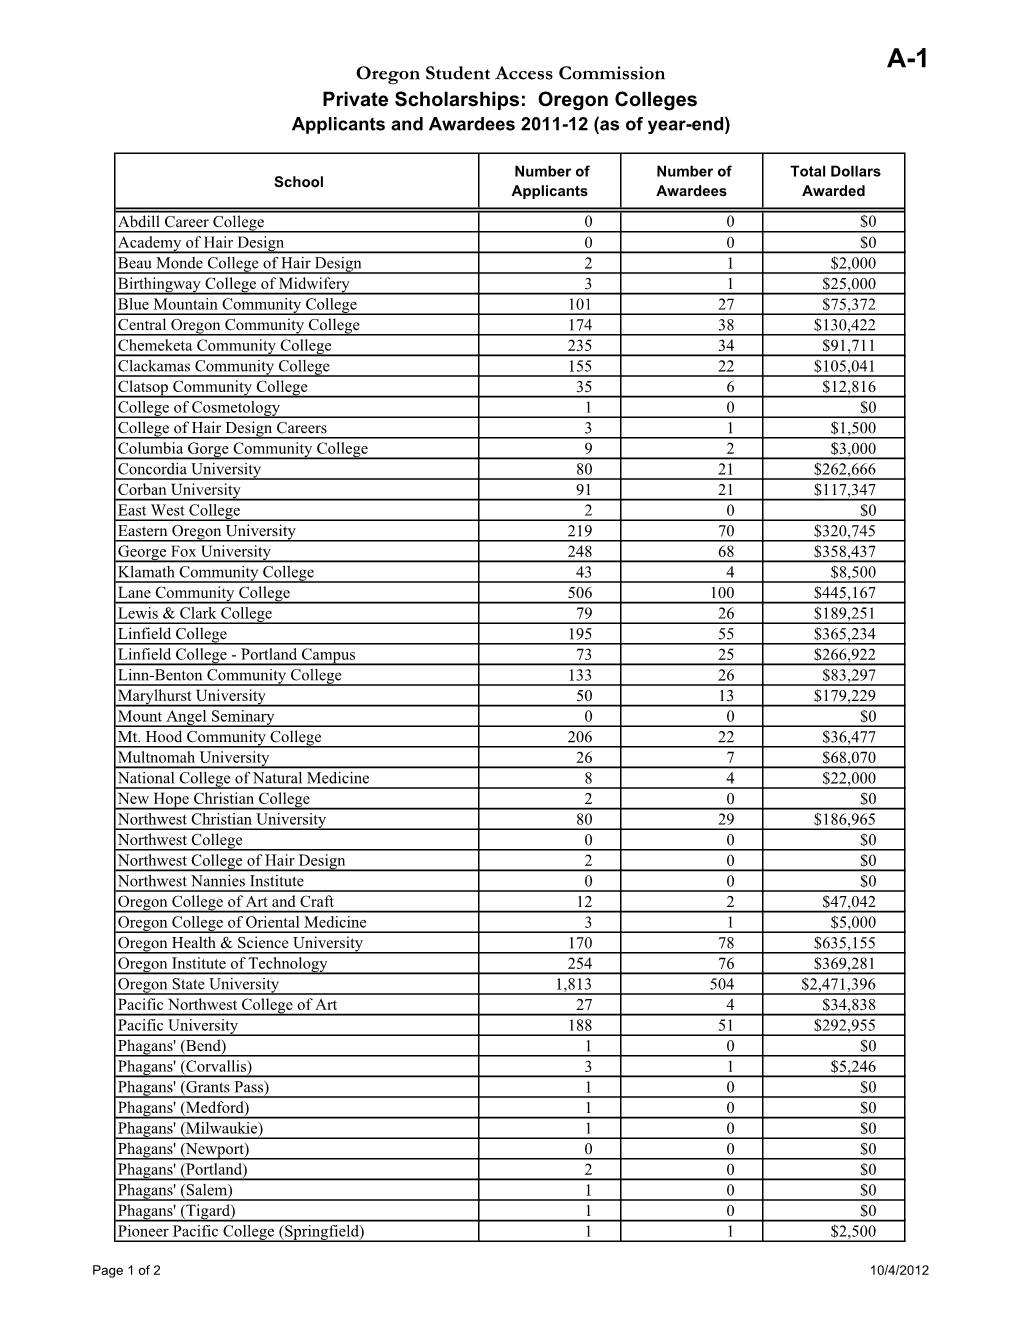 Oregon Colleges Applicants and Awardees 2011-12 (As of Year-End)